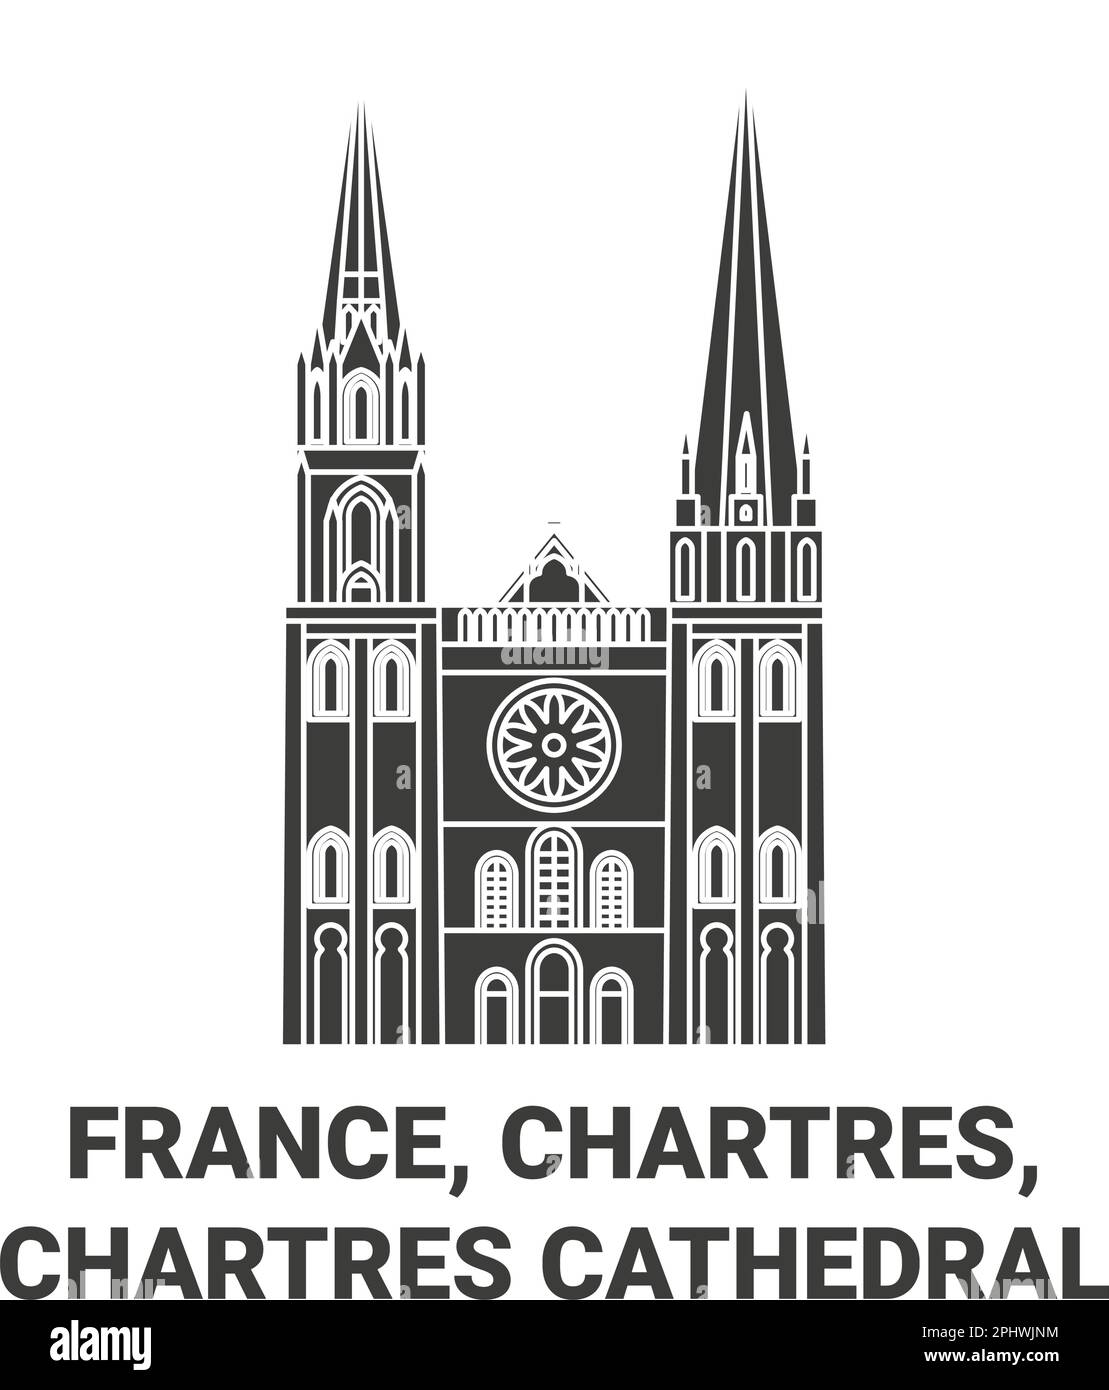 France, Chartres, Chartres Cathedral, travel landmark vector illustration Stock Vector